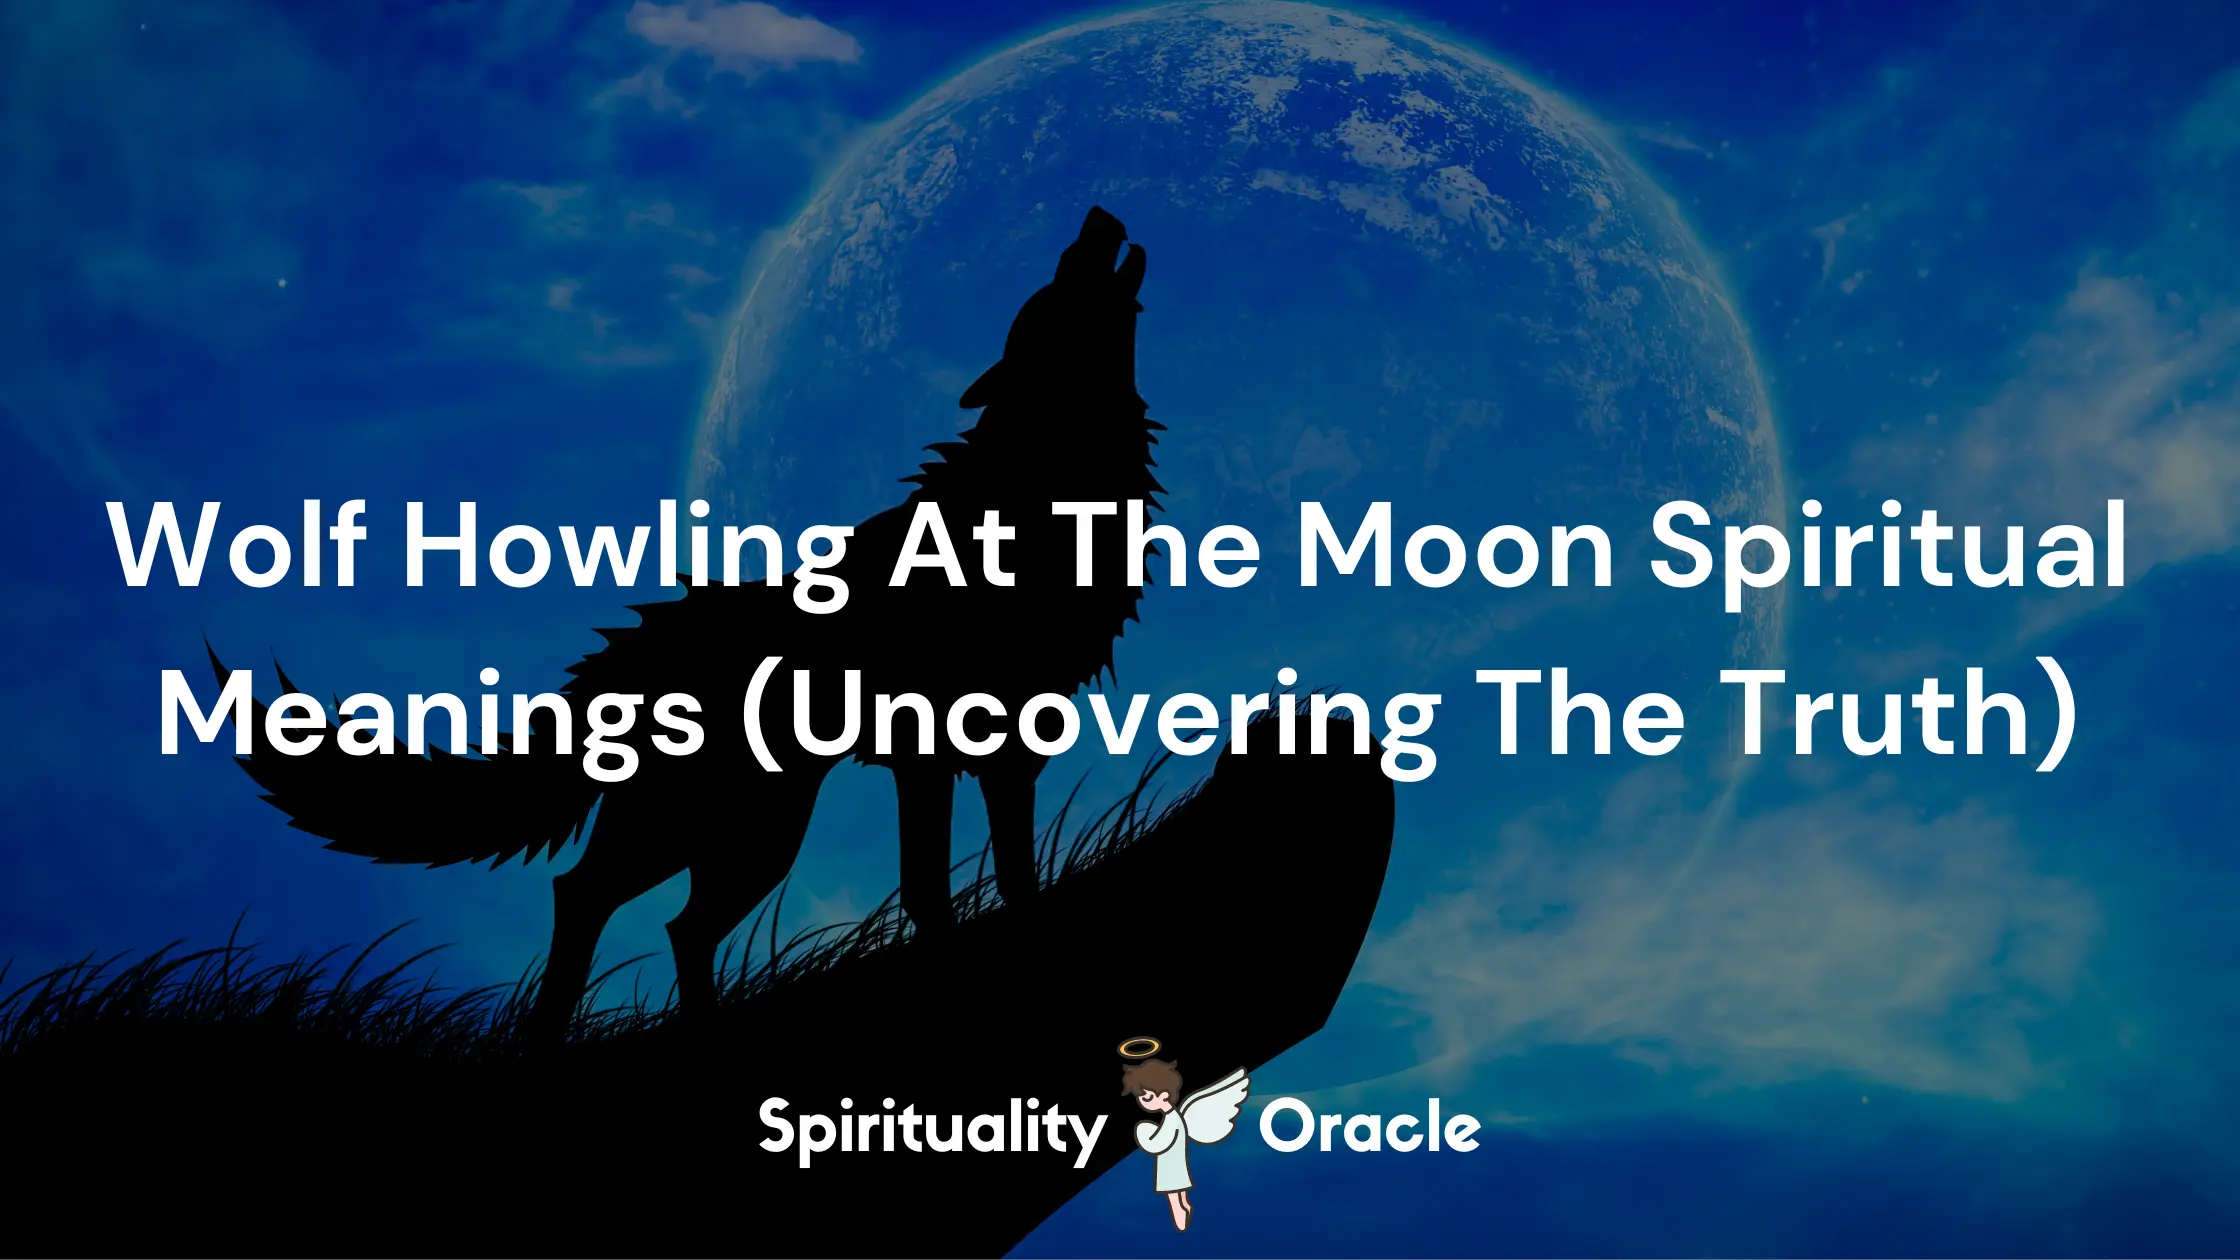 Wolf Howling At The Moon Spiritual Meanings (Uncovering The Truth)